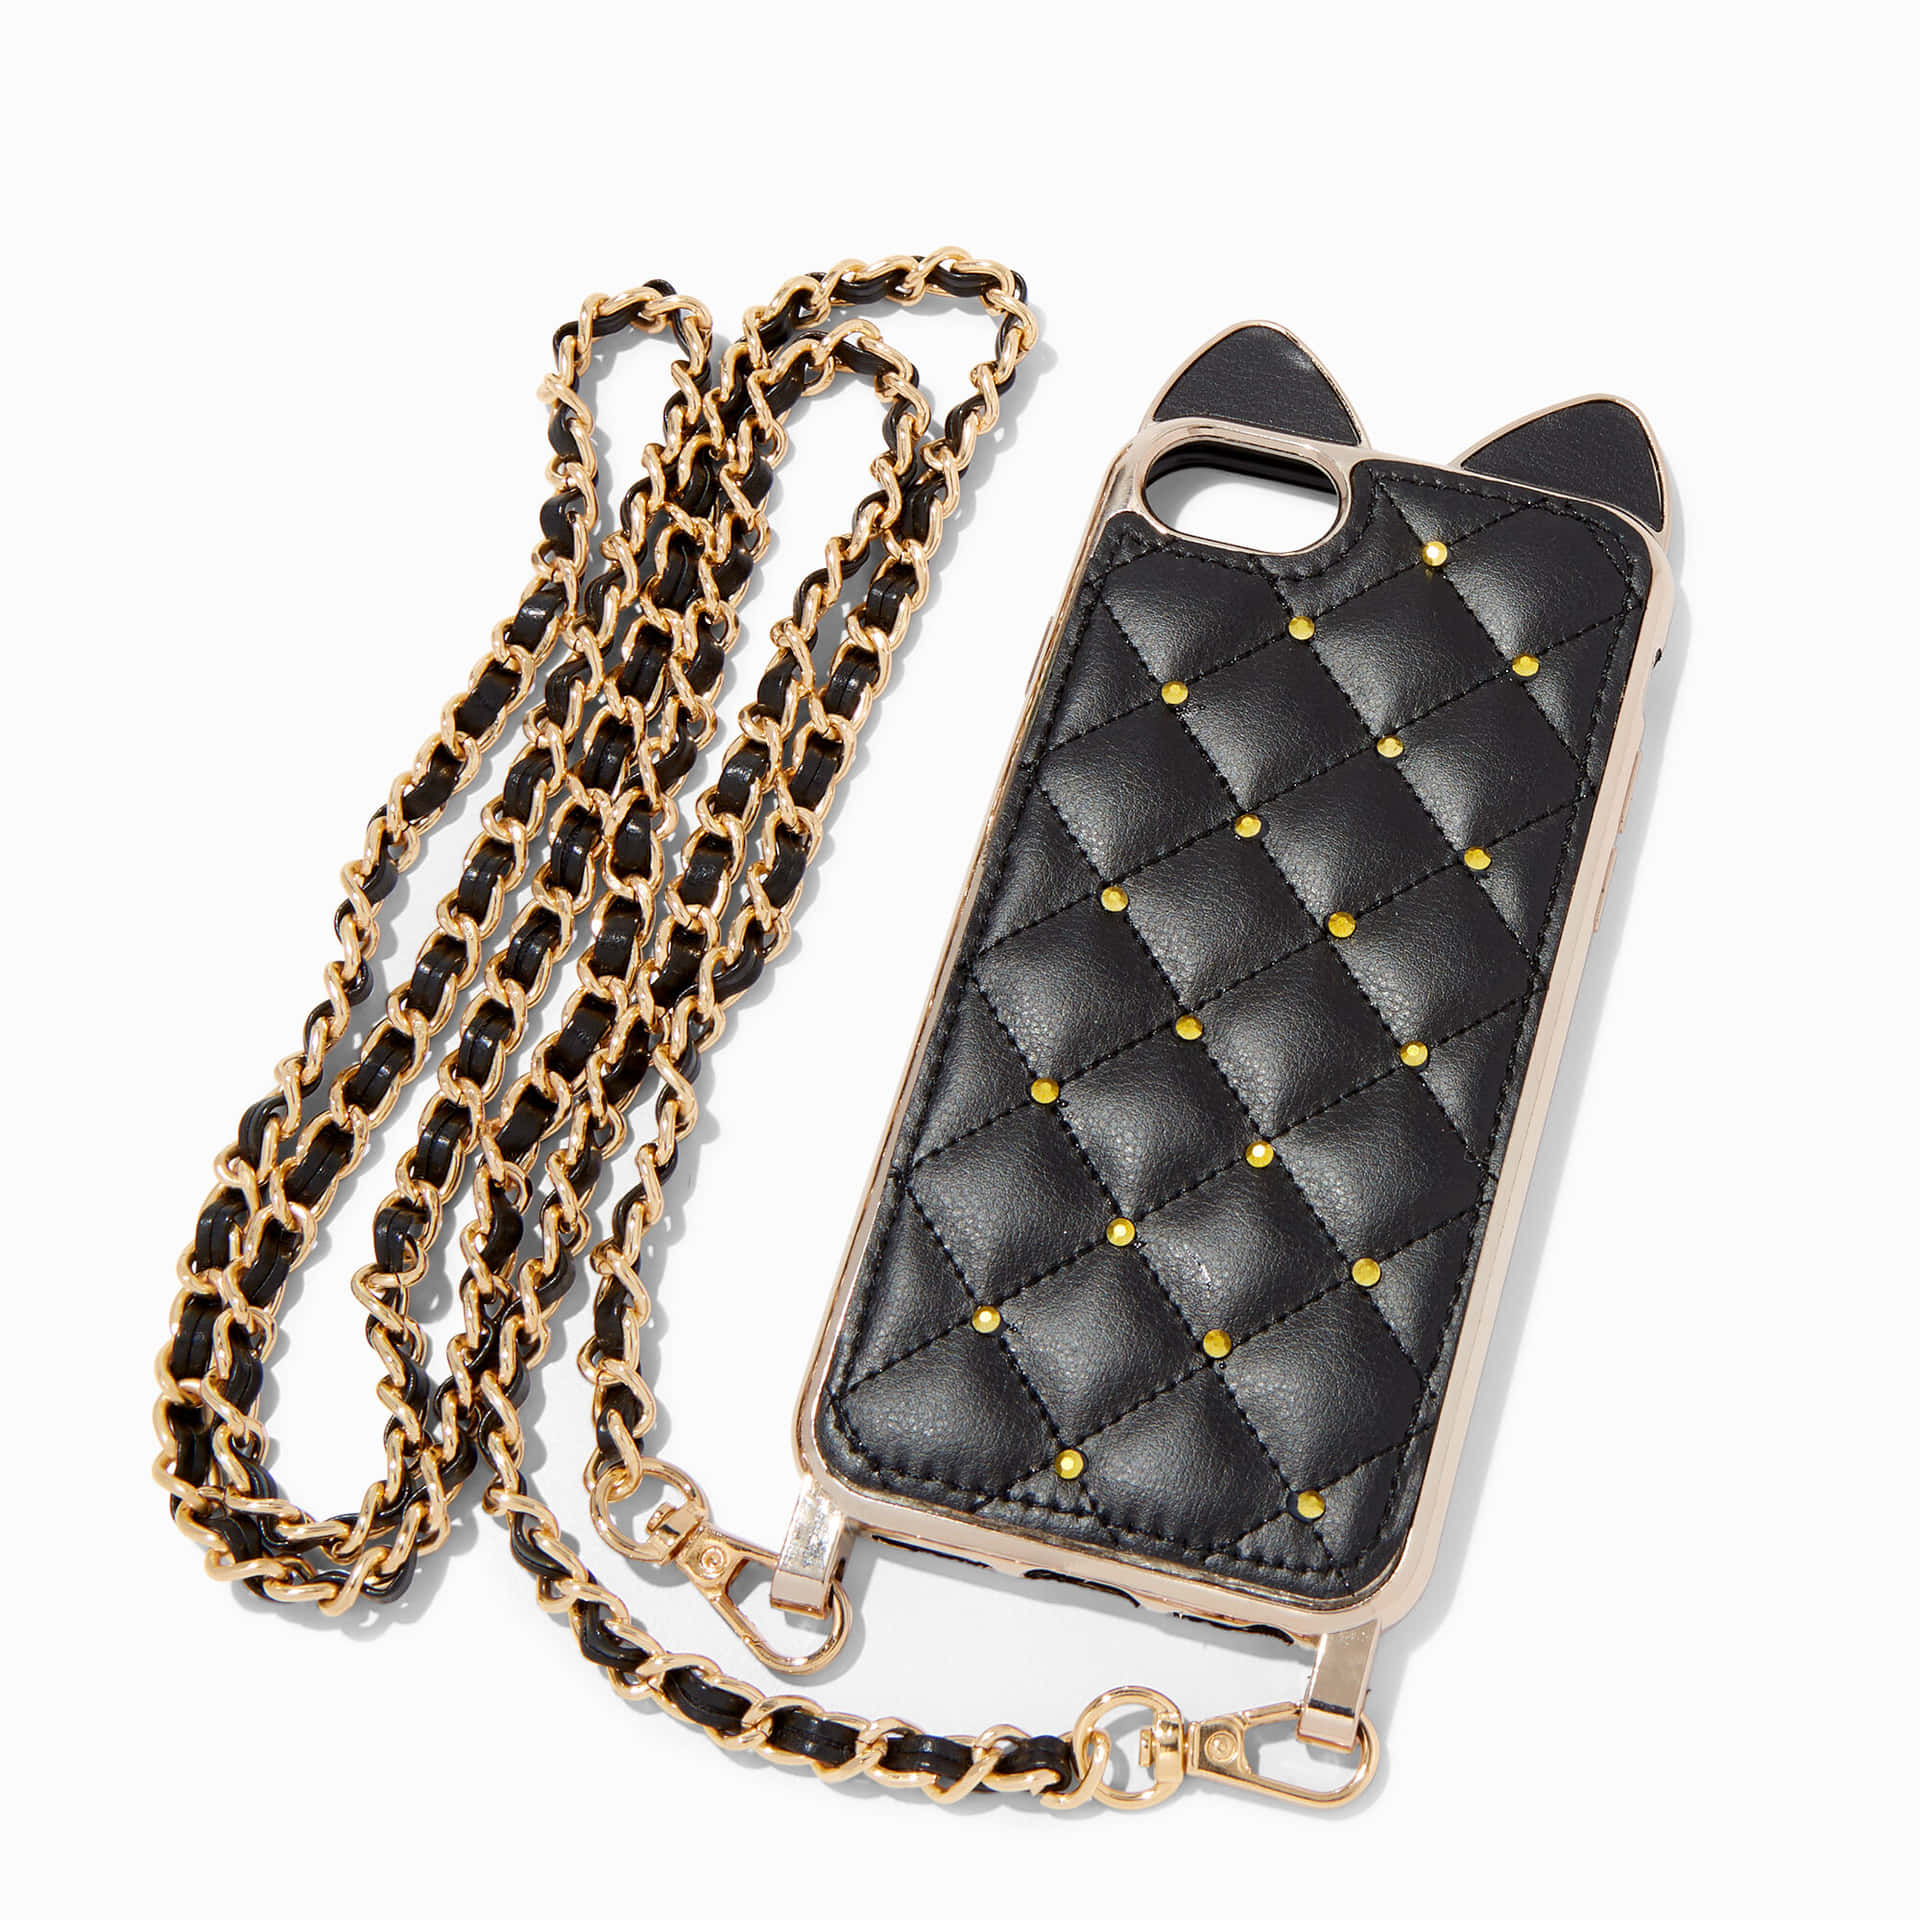 A Black Cat Phone Case With A Chain Attached To It Wallpaper